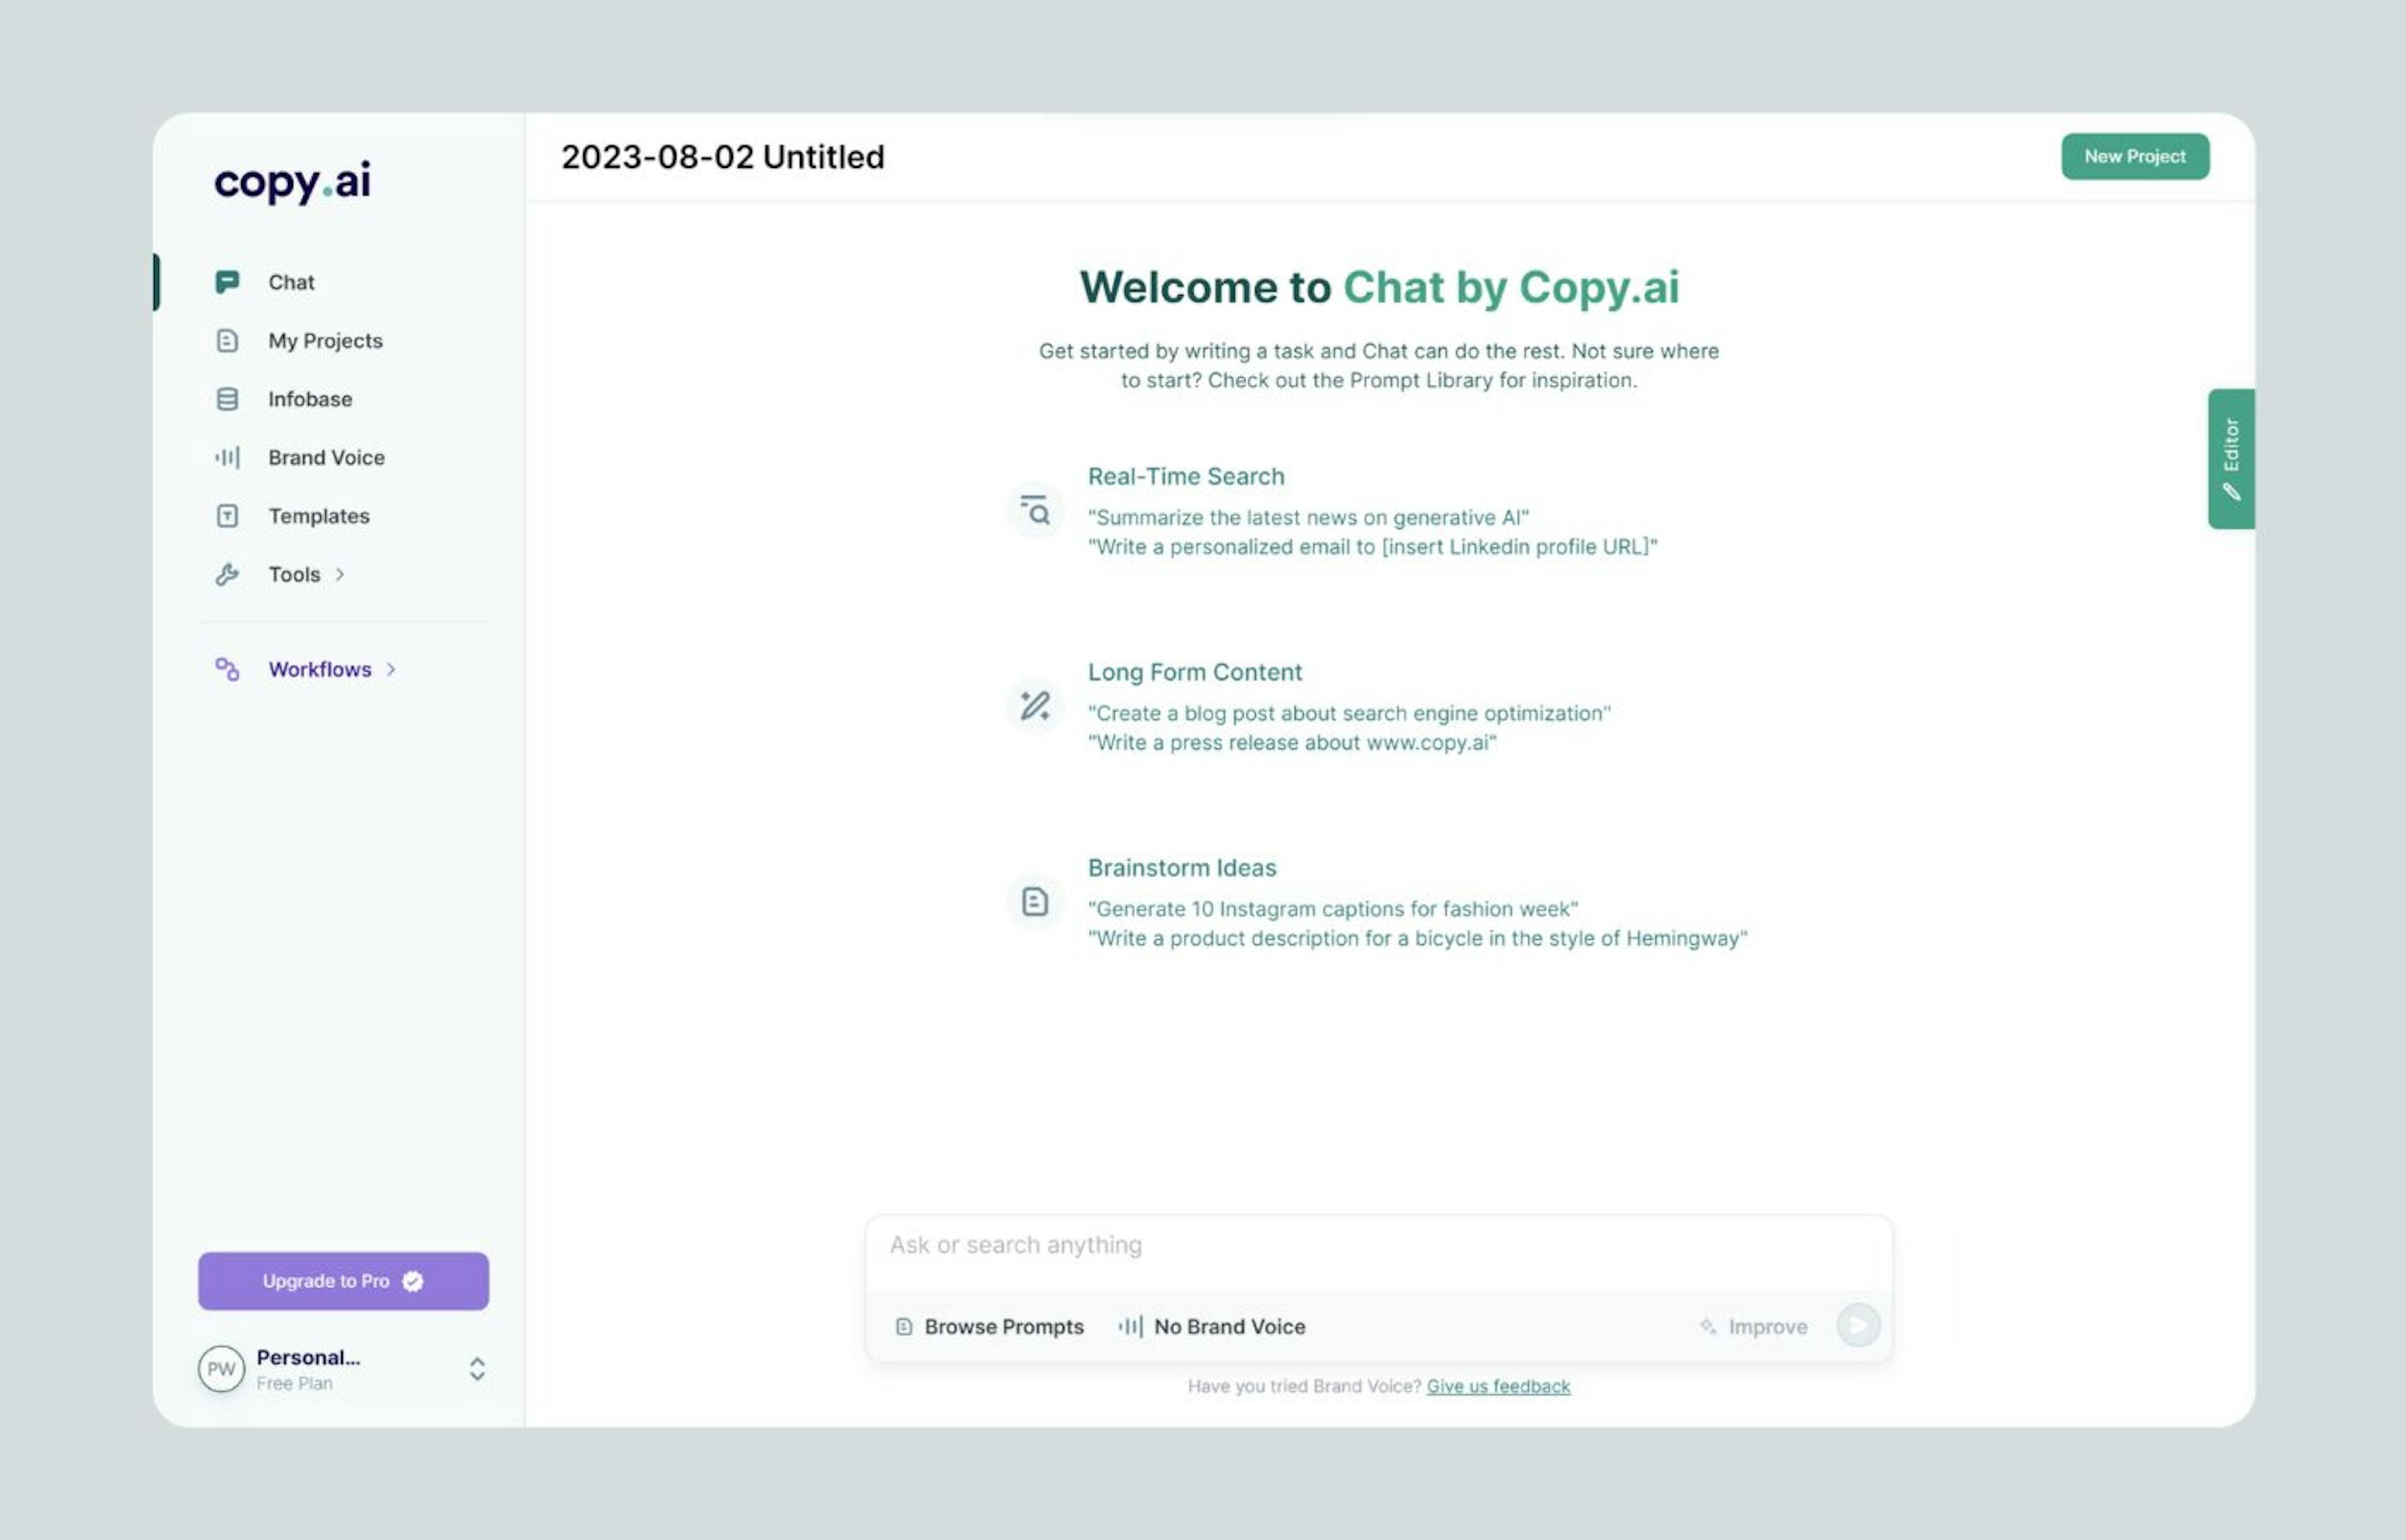 Copy.ai looks like a chatbot, but its primary function is narrowed down to help you write marketing copy